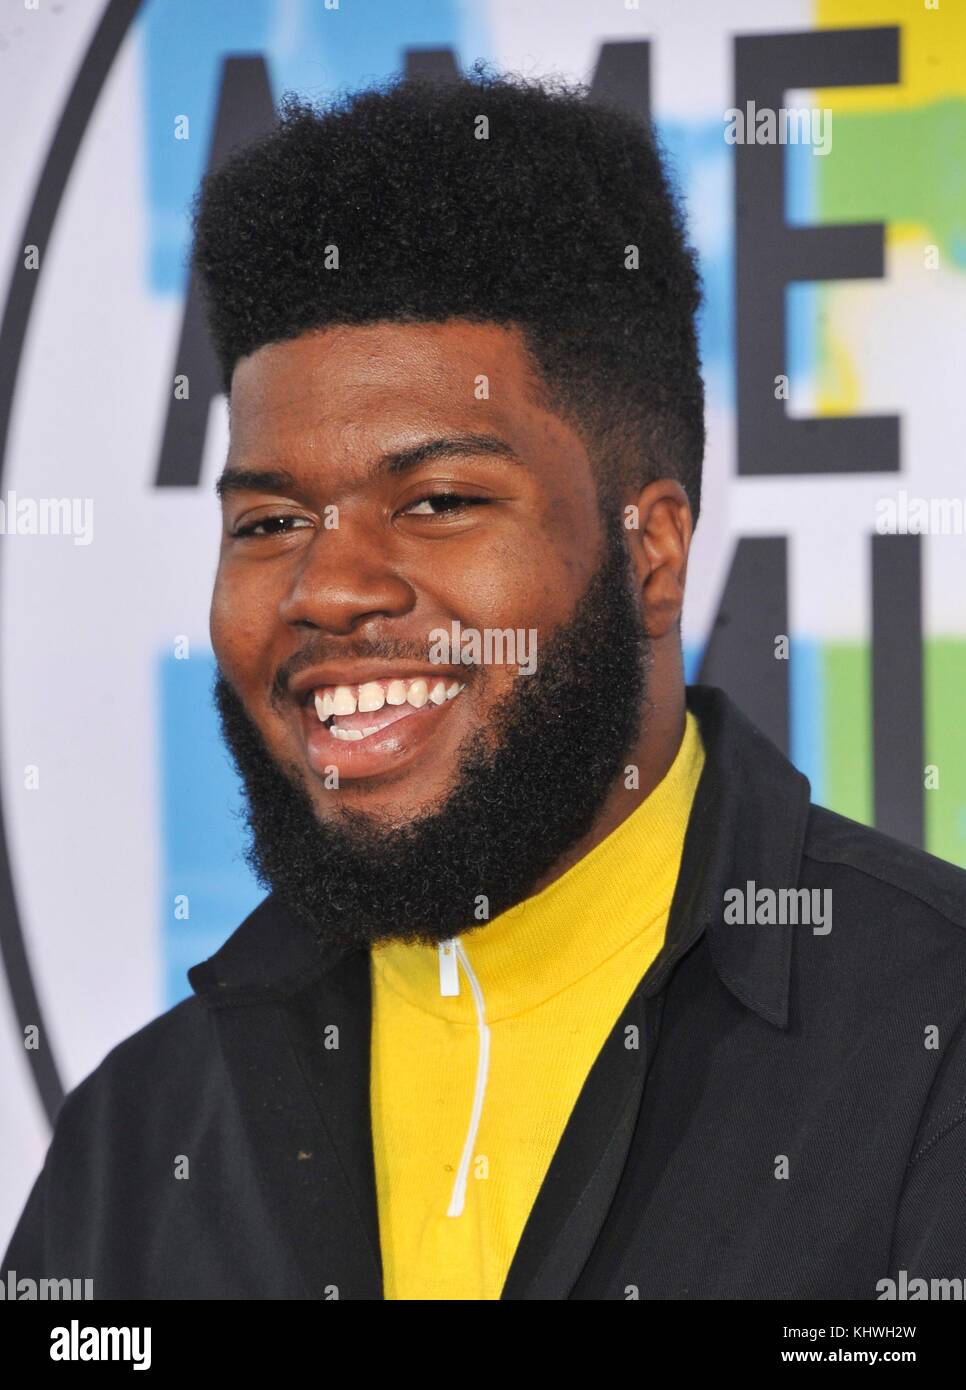 Los Angeles, CA, USA. 19th Nov, 2017. Khalid at arrivals for 2017 American Music Awards (AMAs) - Arrivals 2, Microsoft Theater, Los Angeles, CA November 19, 2017. Credit: Elizabeth Goodenough/Everett Collection/Alamy Live News Stock Photo